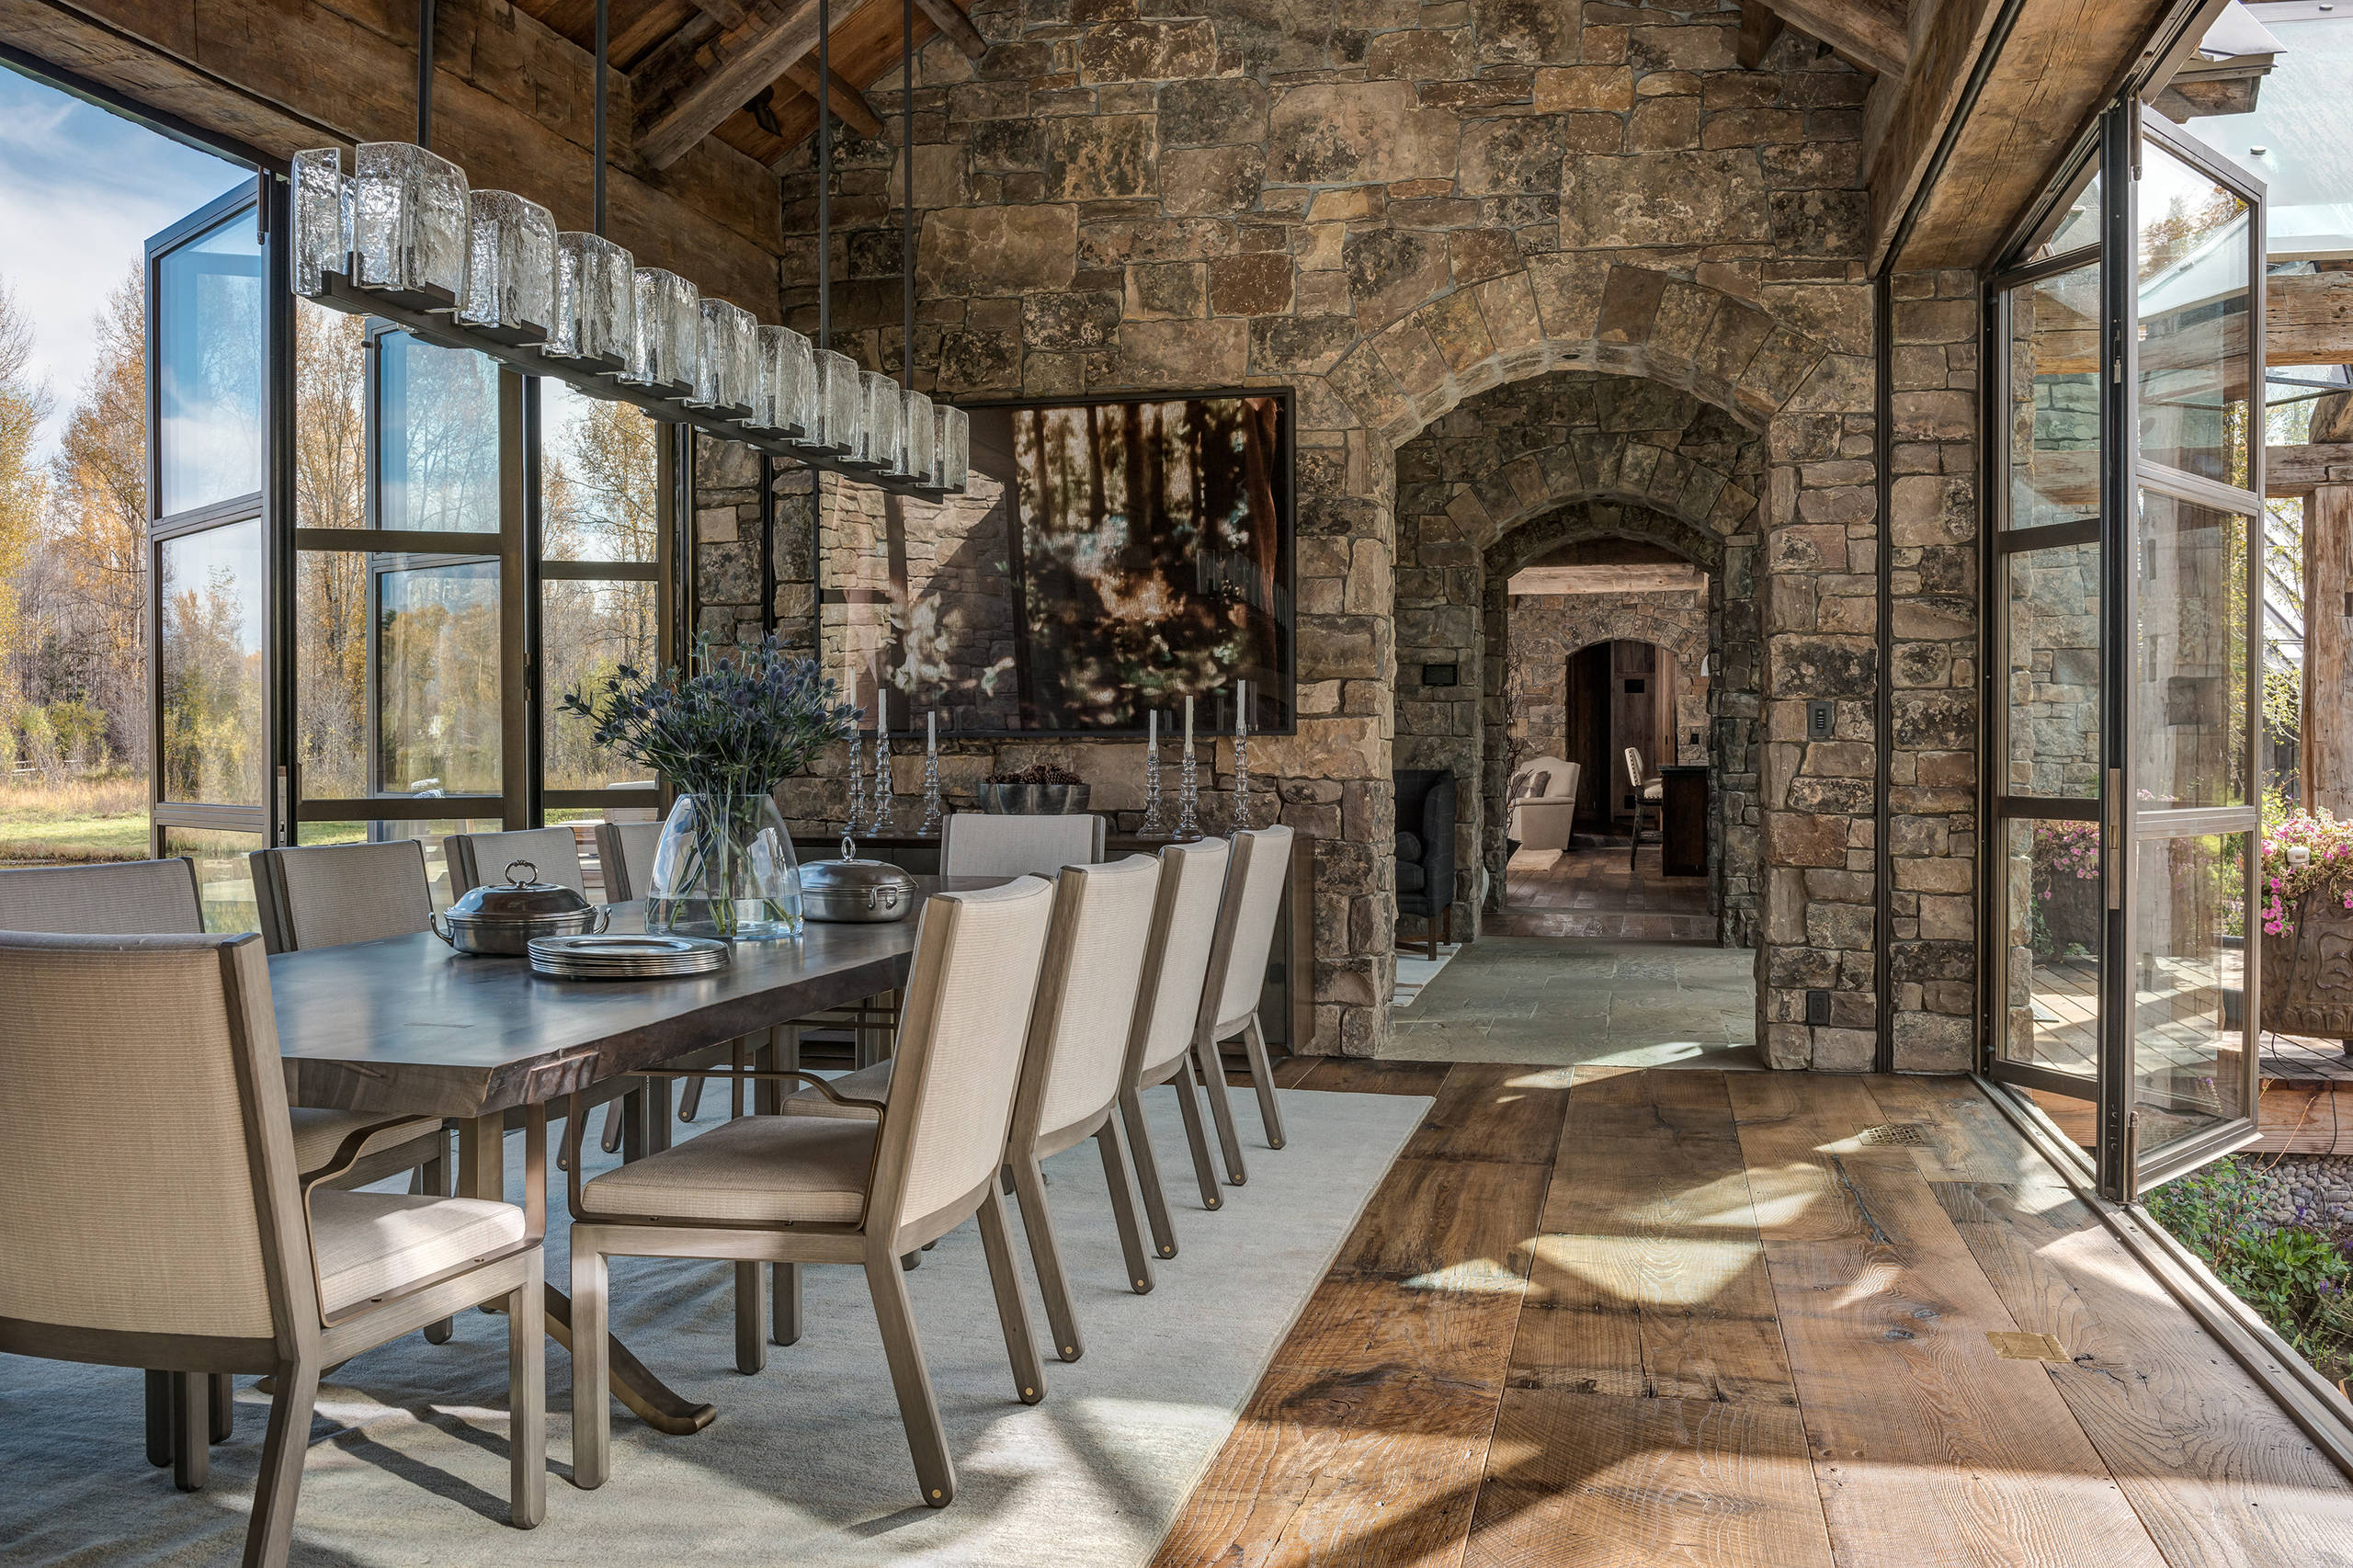 16 Majestic Rustic Dining Room Designs You Can't Miss Out